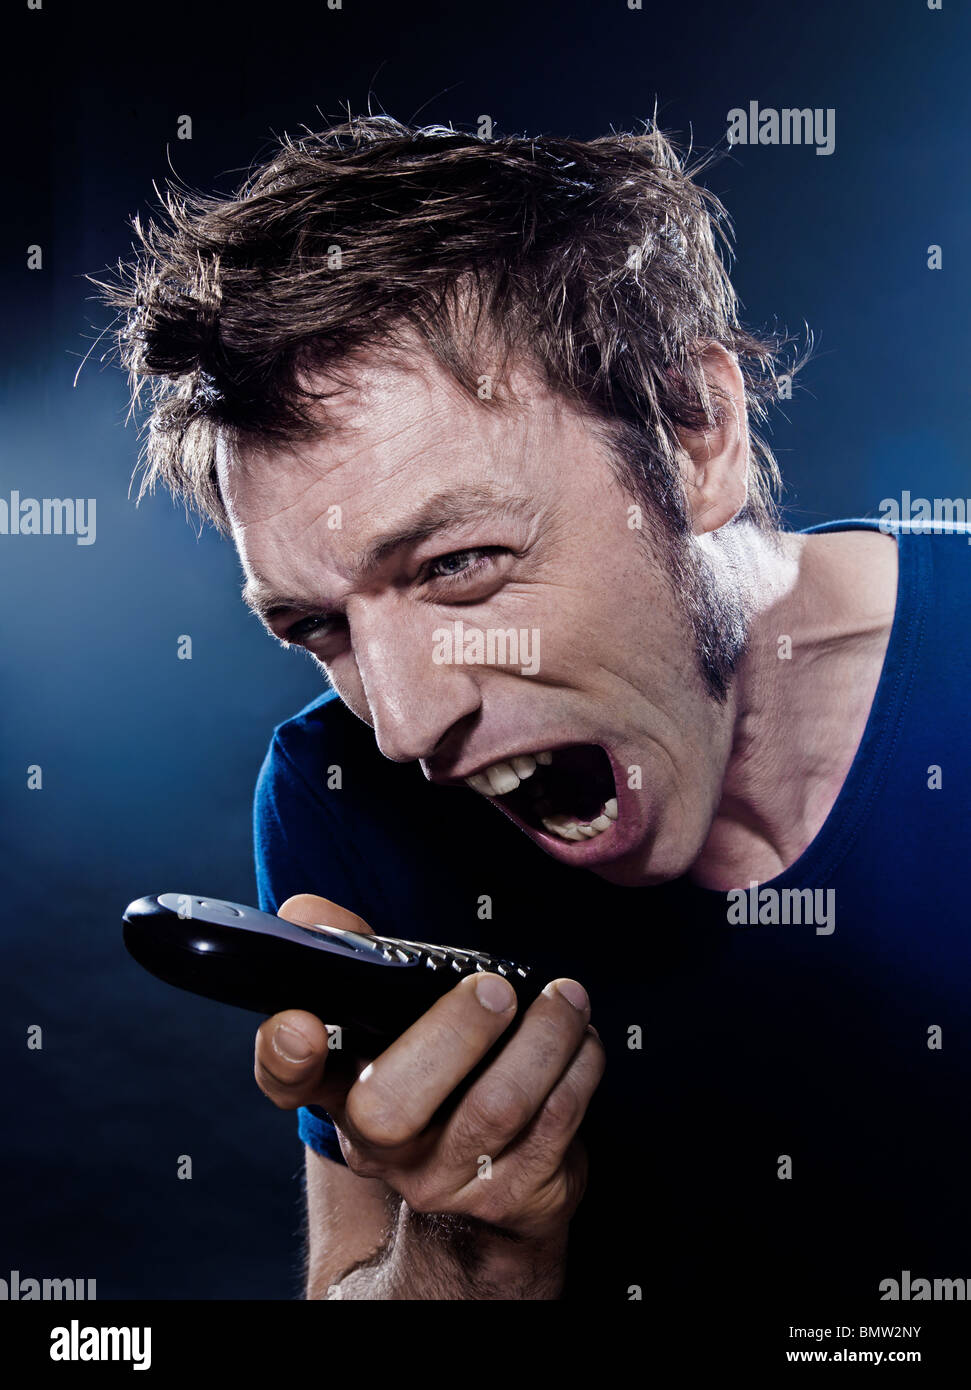 studio portrait on black background of a funny expressive caucasian man yelling at phone Stock Photo